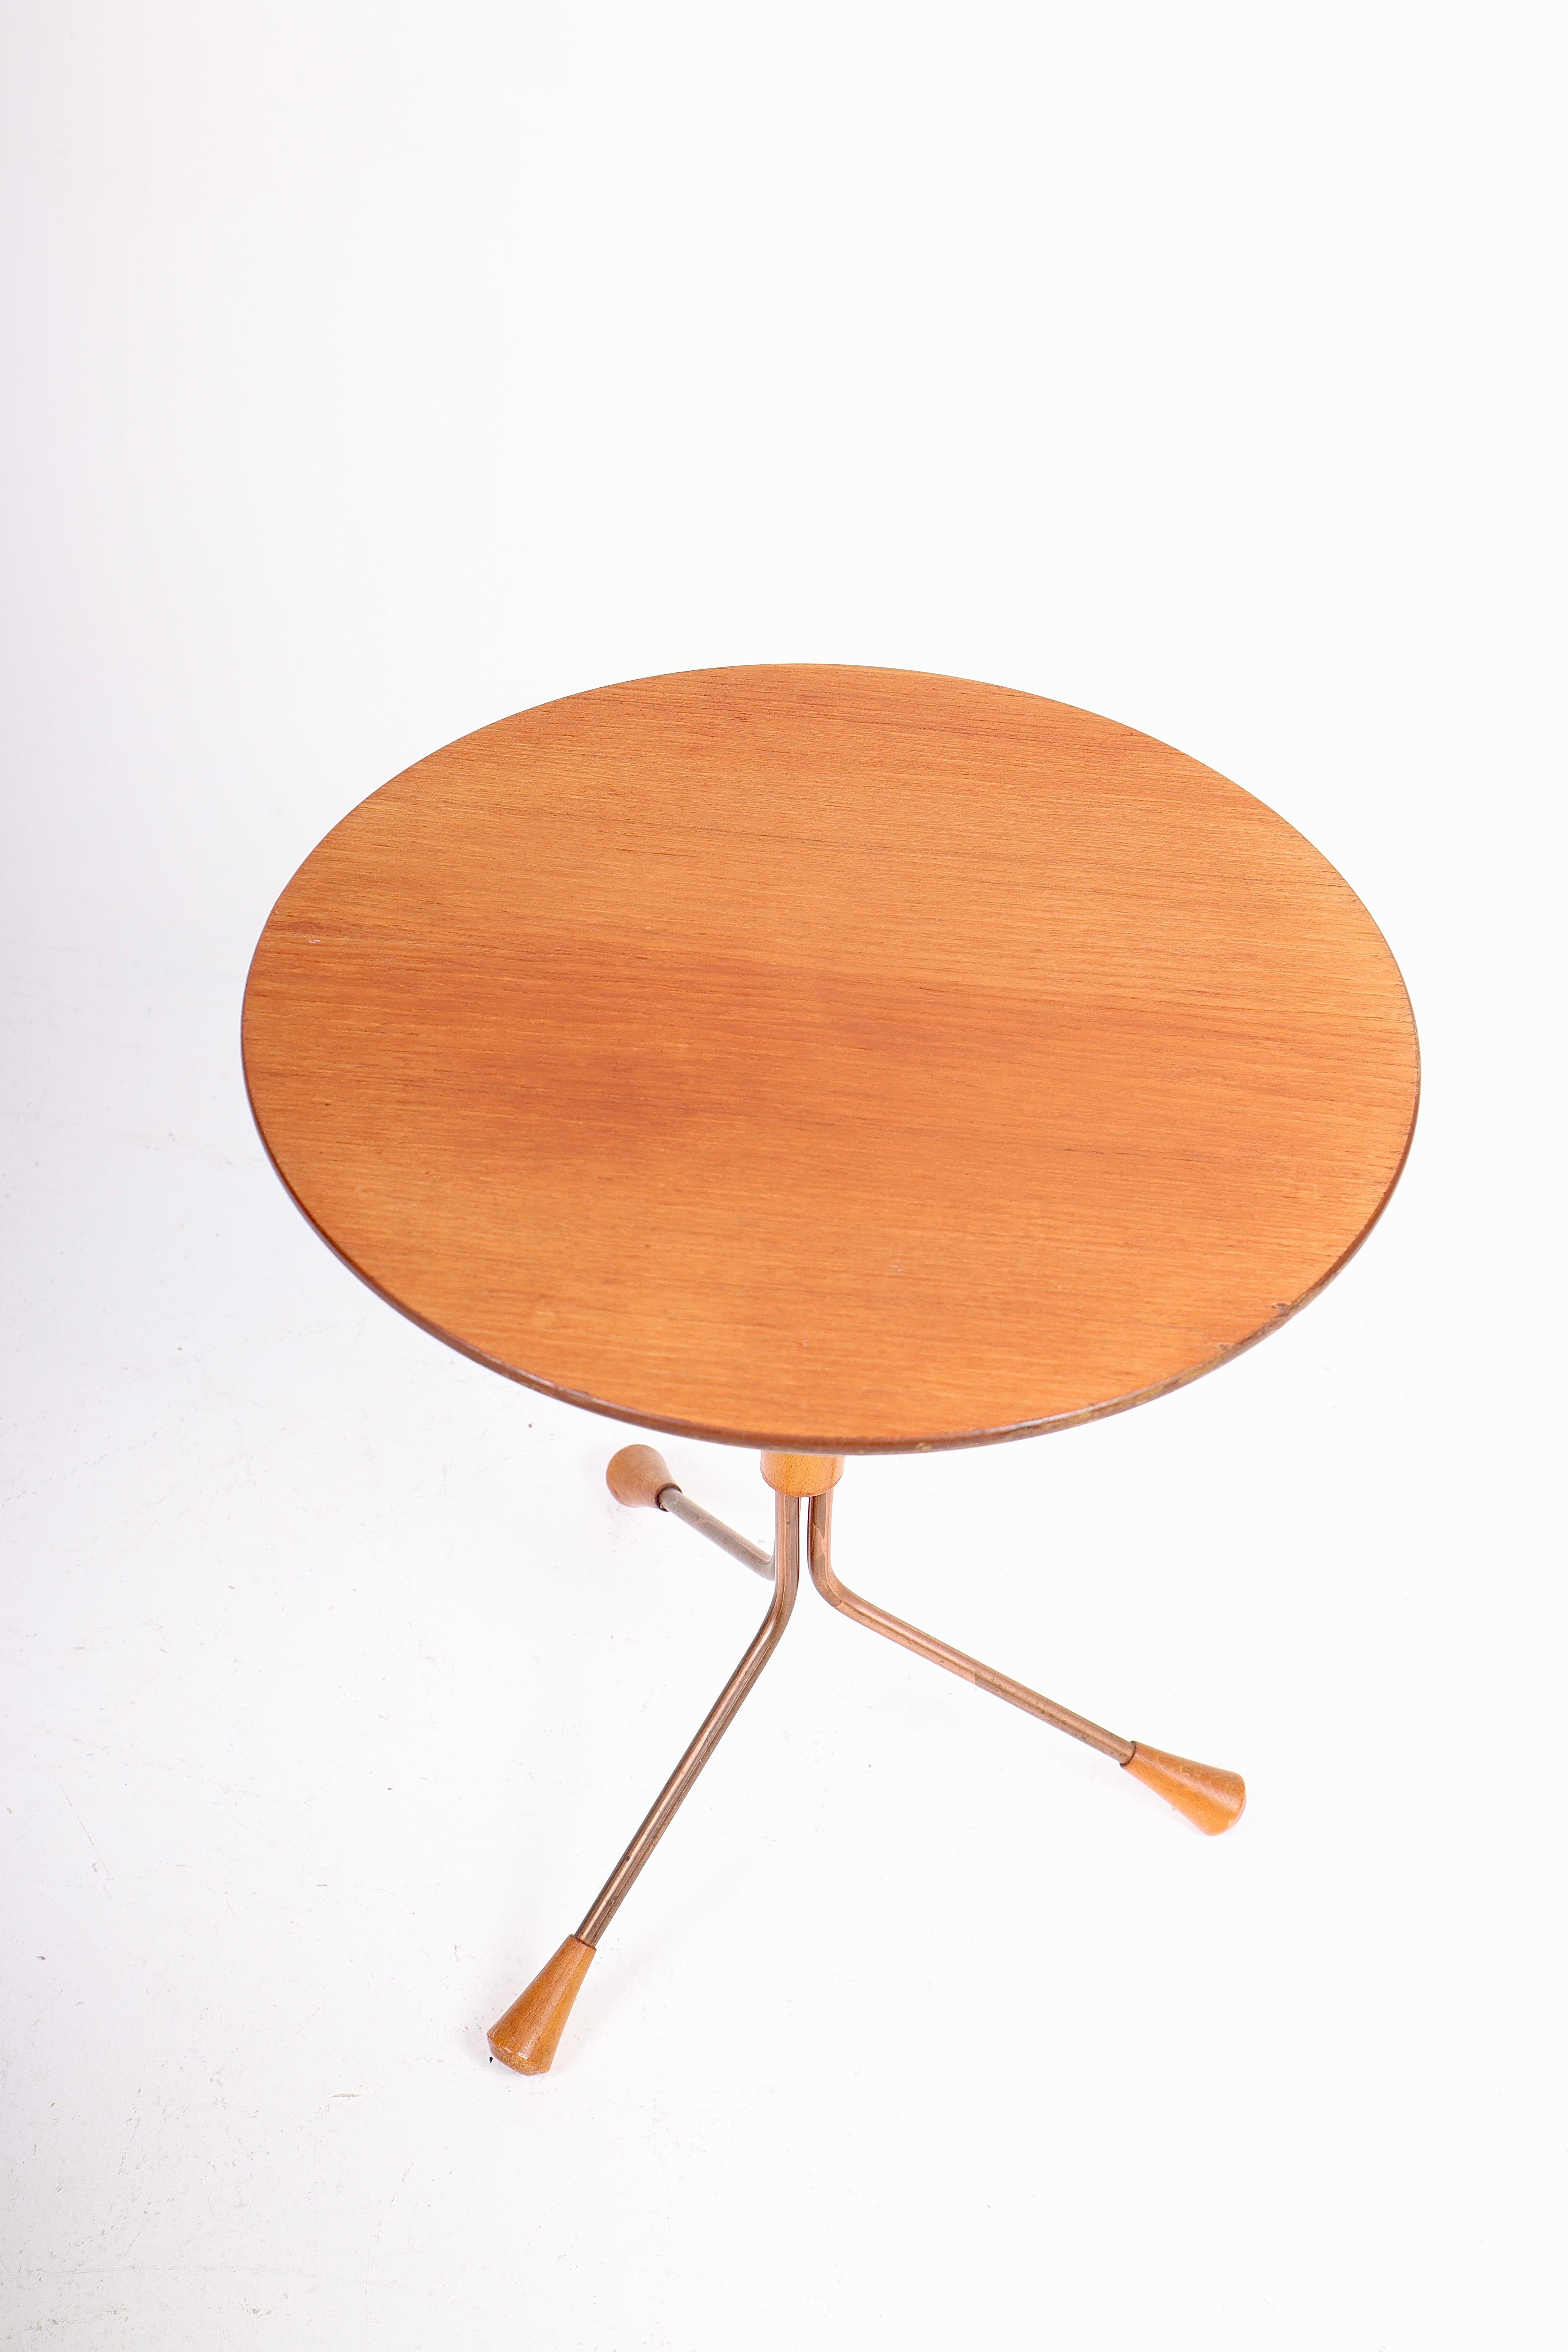 Swedish Two Midcentury Side Tables in Teak and Mahogany by Albert Larsson, 1960s For Sale